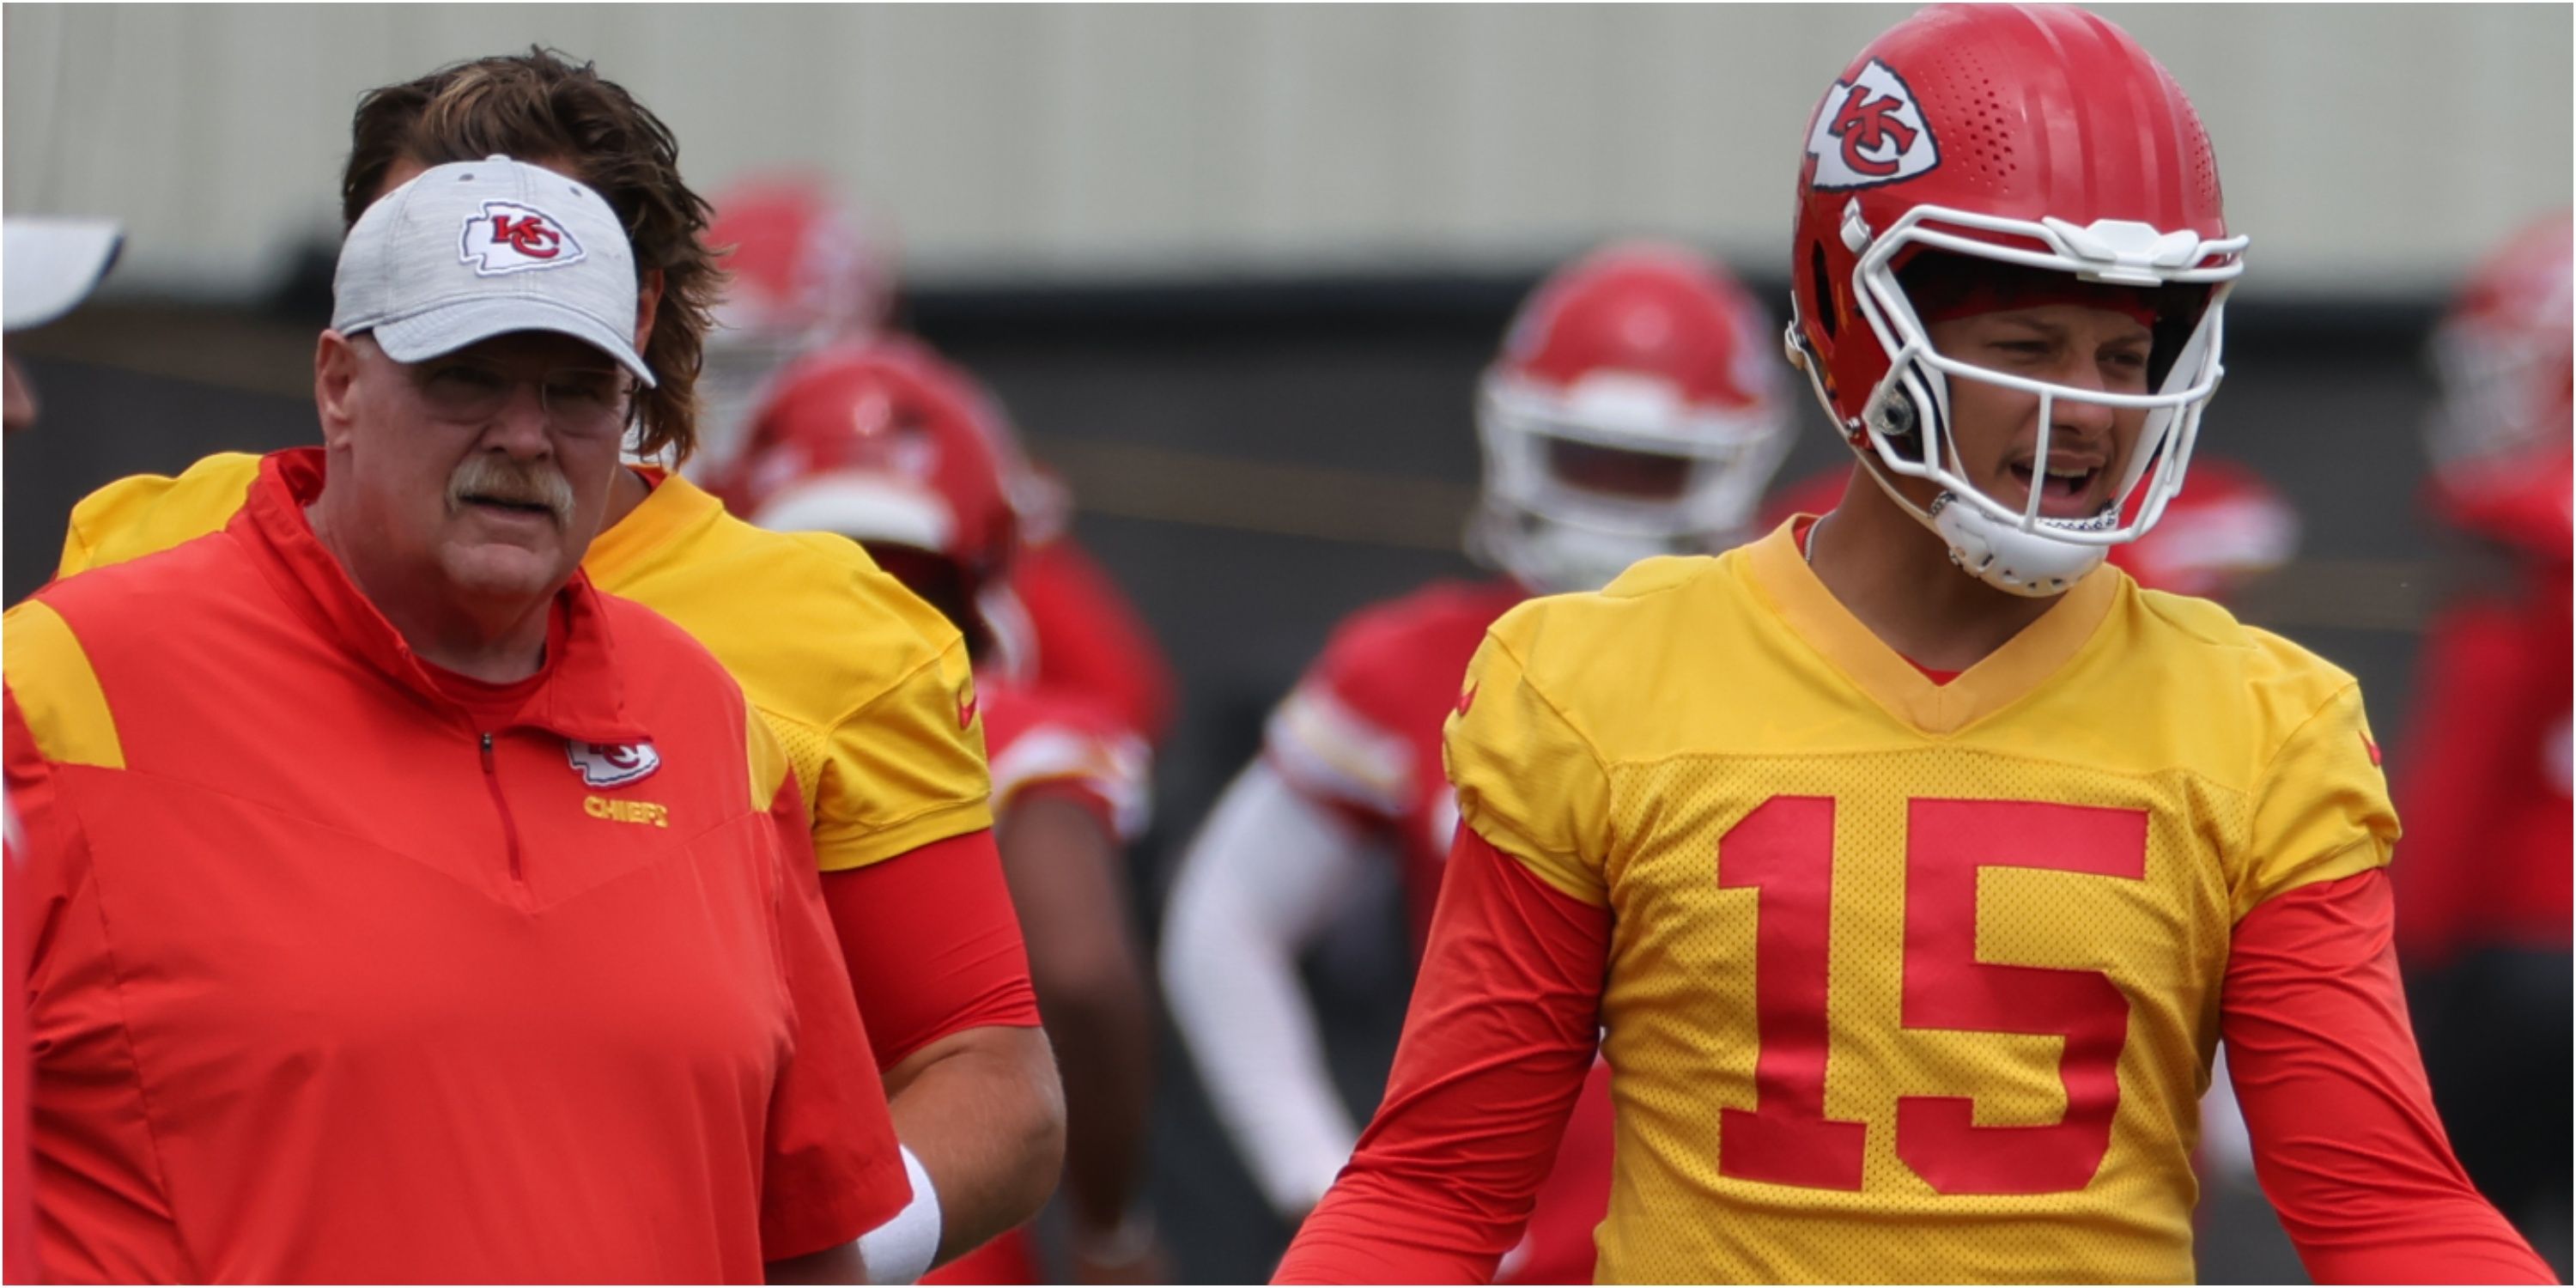 Kansas City Chiefs: ESPN analyst names team that 'can excel offensively' as biggest threat to